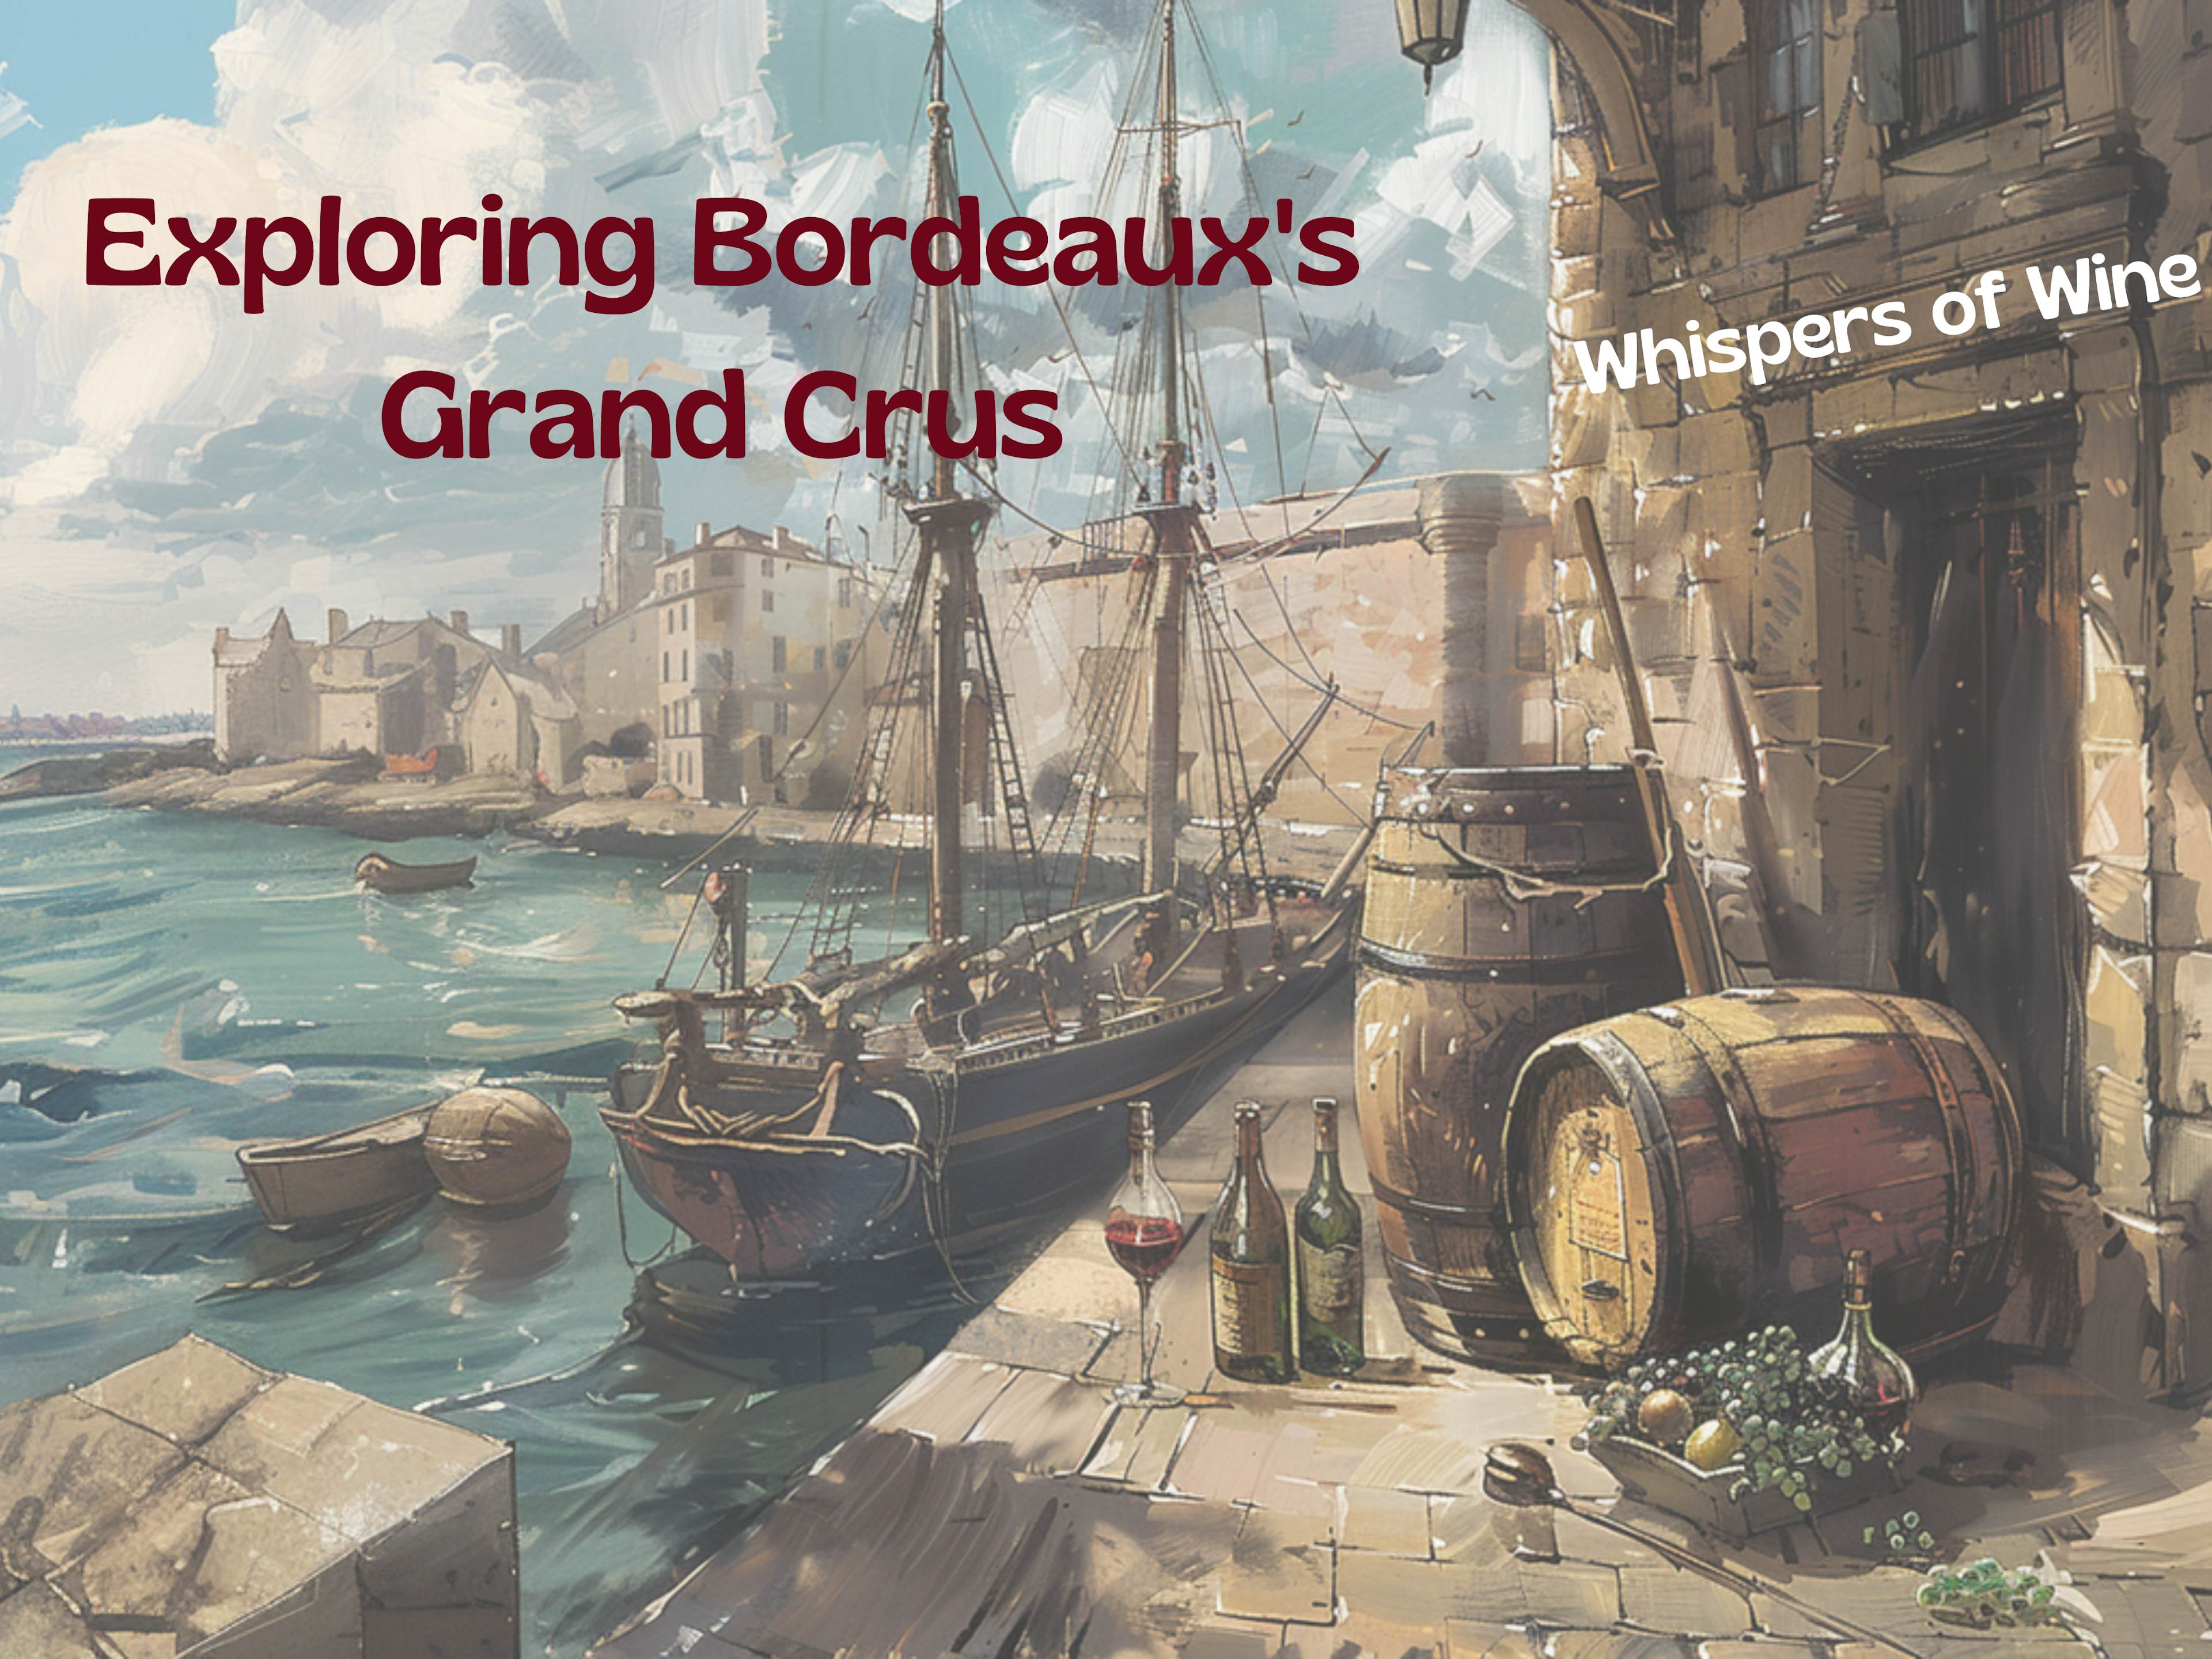 Whispers of Wine: Exploring Bordeaux's Grand Crus image